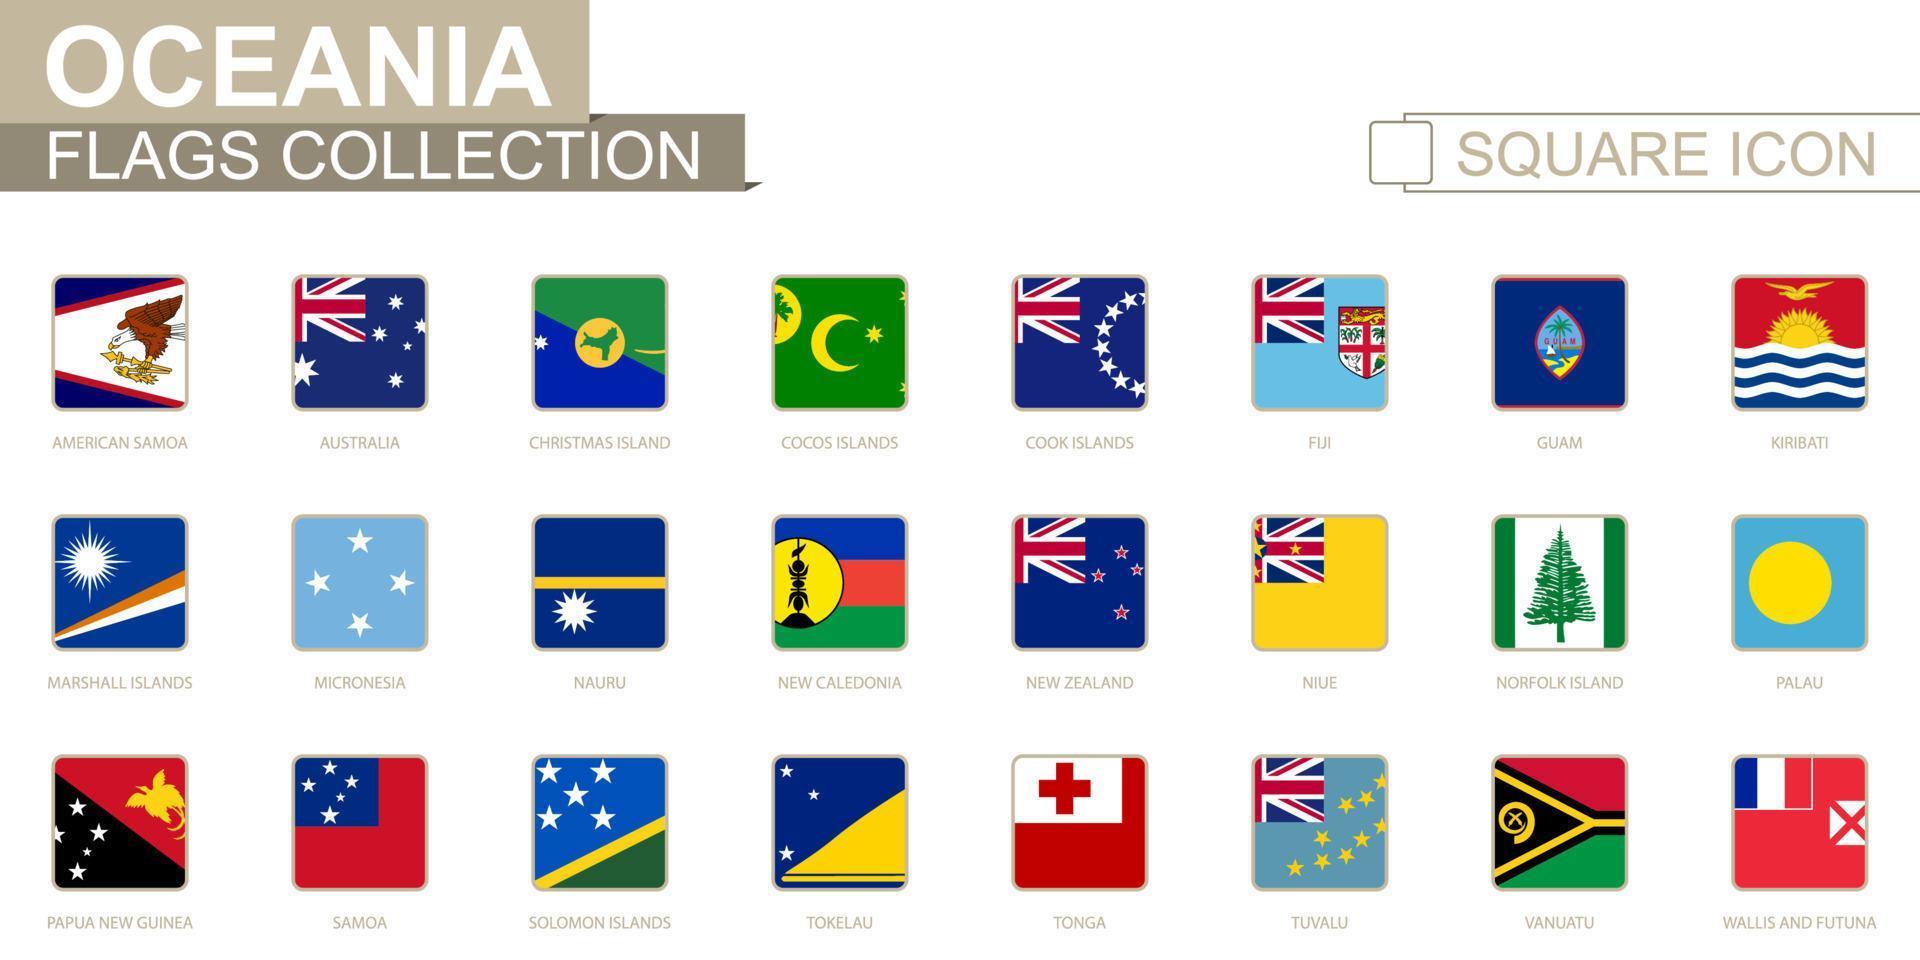 Square flags of Oceania. From American Samoa to Wallis and Futuna. vector